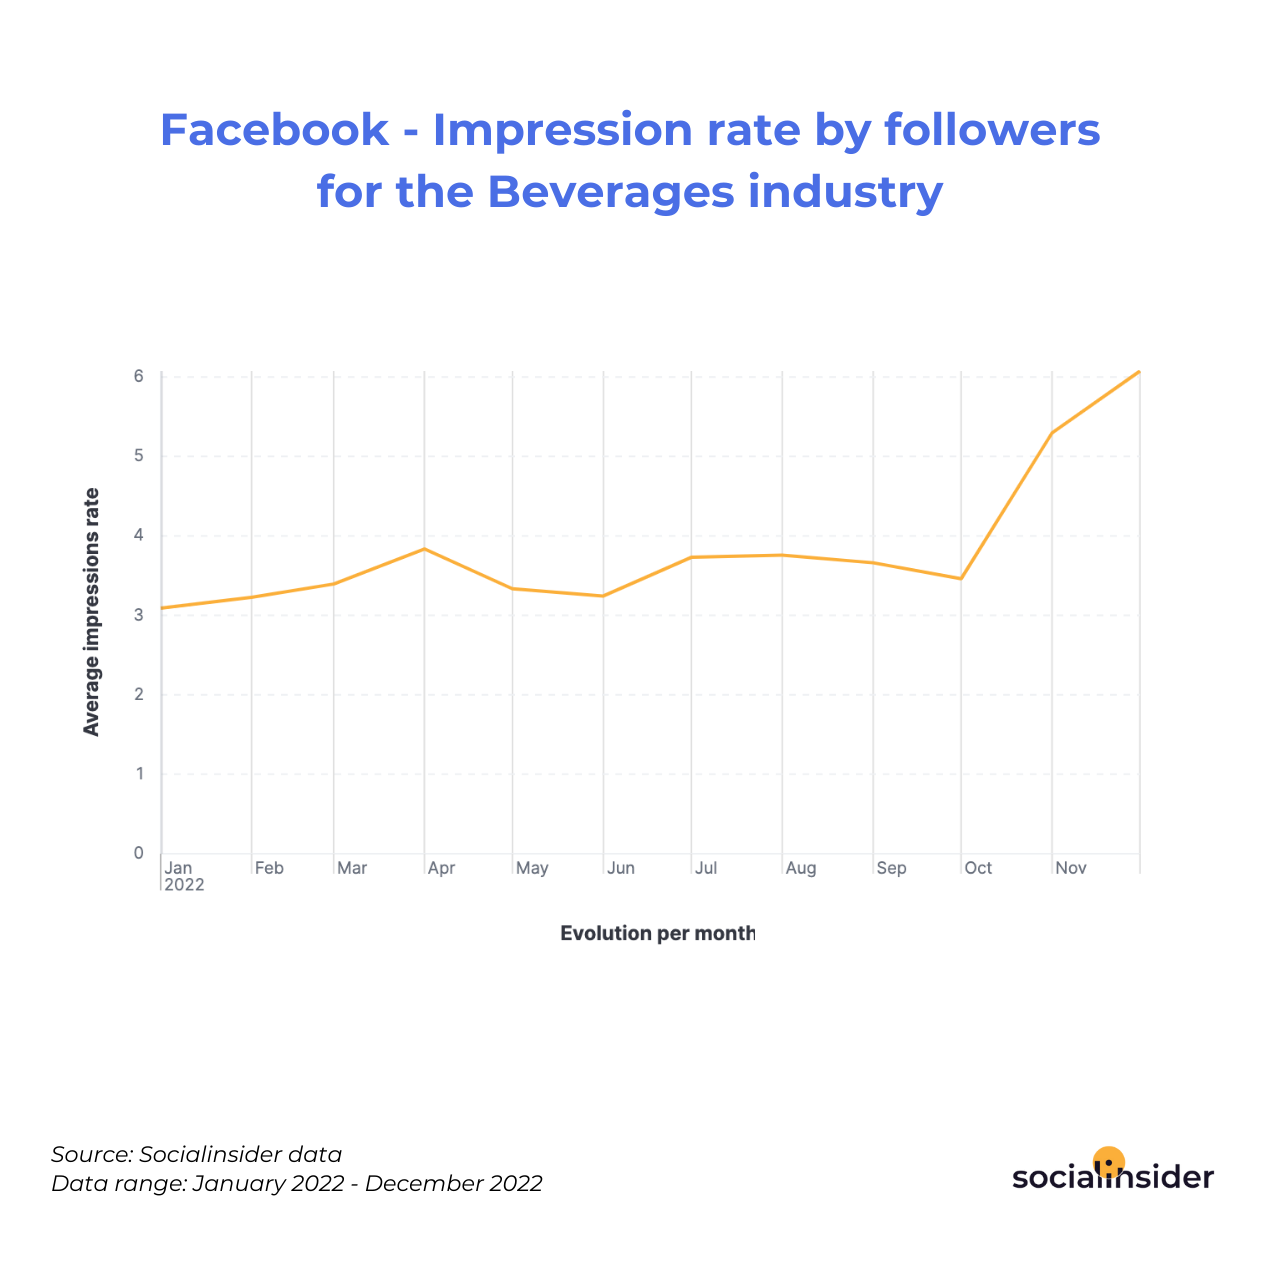 Facebook - Impression rate by followers for the Beverages industry